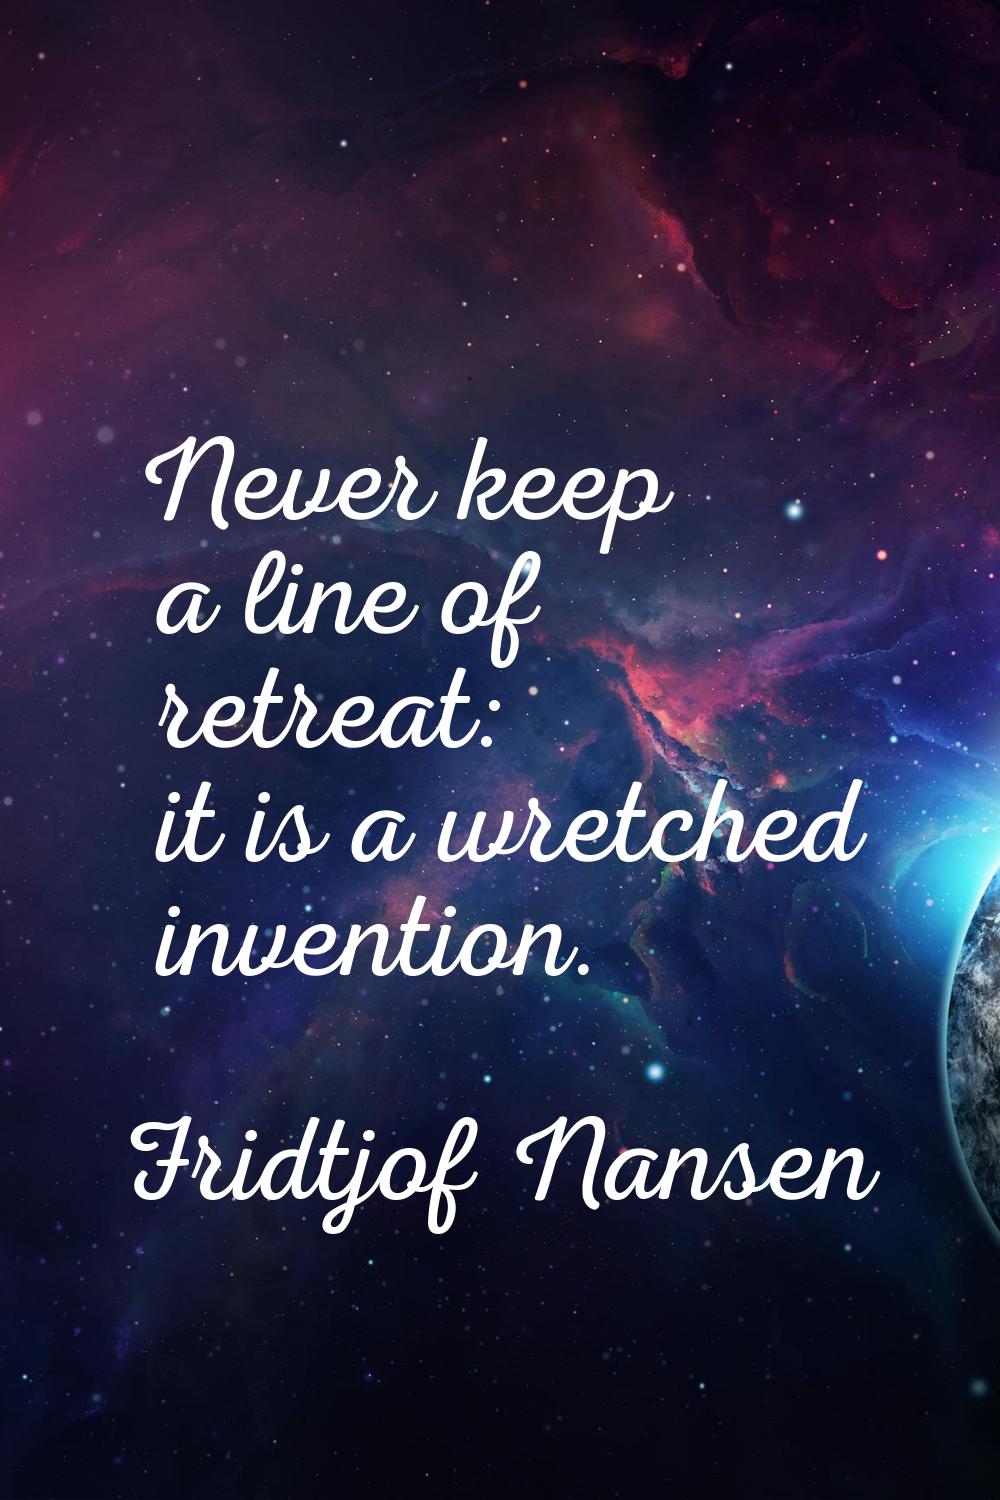 Never keep a line of retreat: it is a wretched invention.